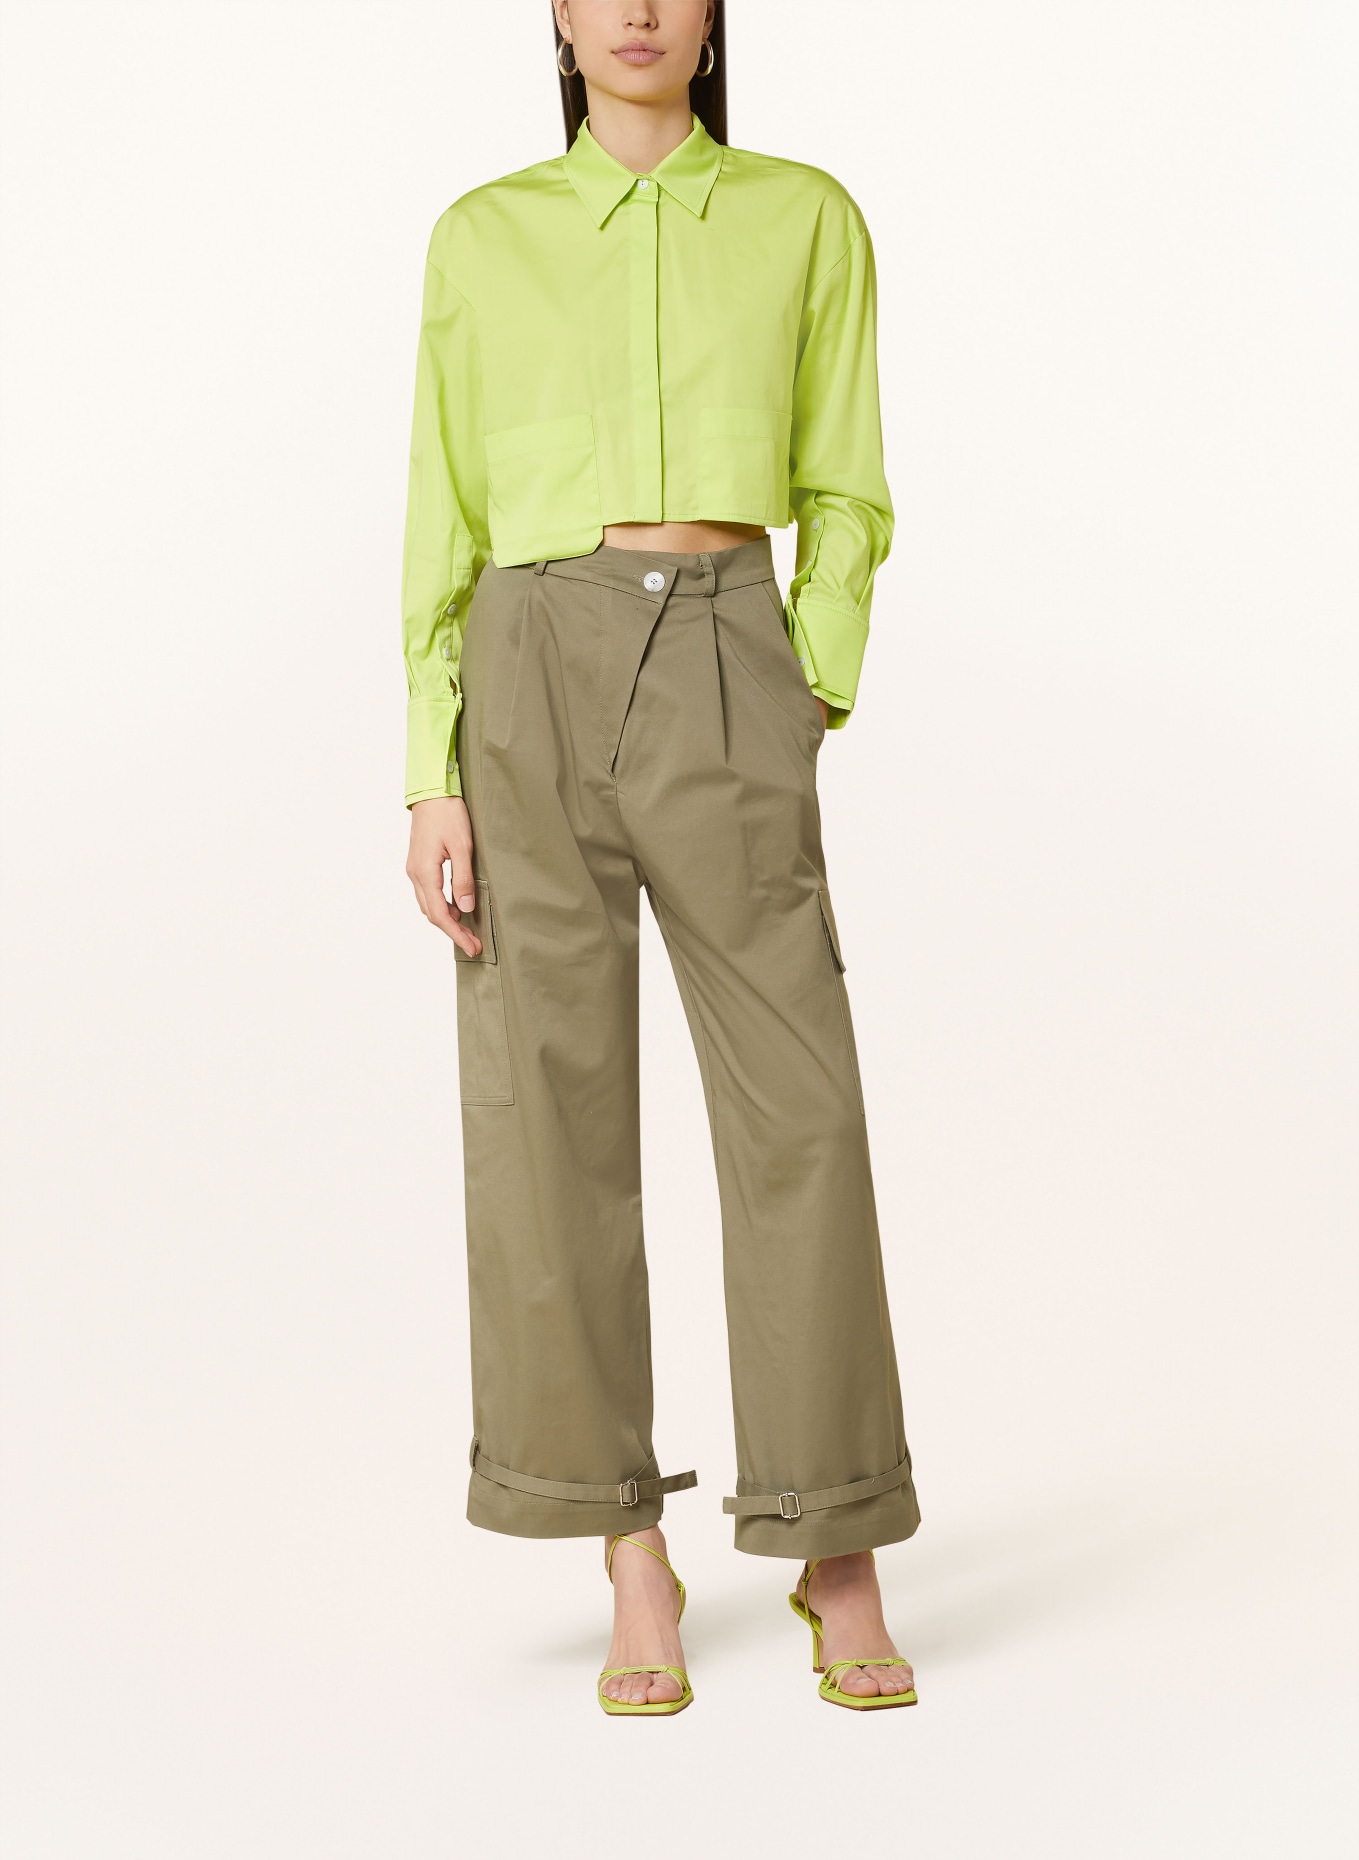 OH APRIL Cropped-Hemdbluse ARIA, Farbe: LIME LIME (Bild 2)